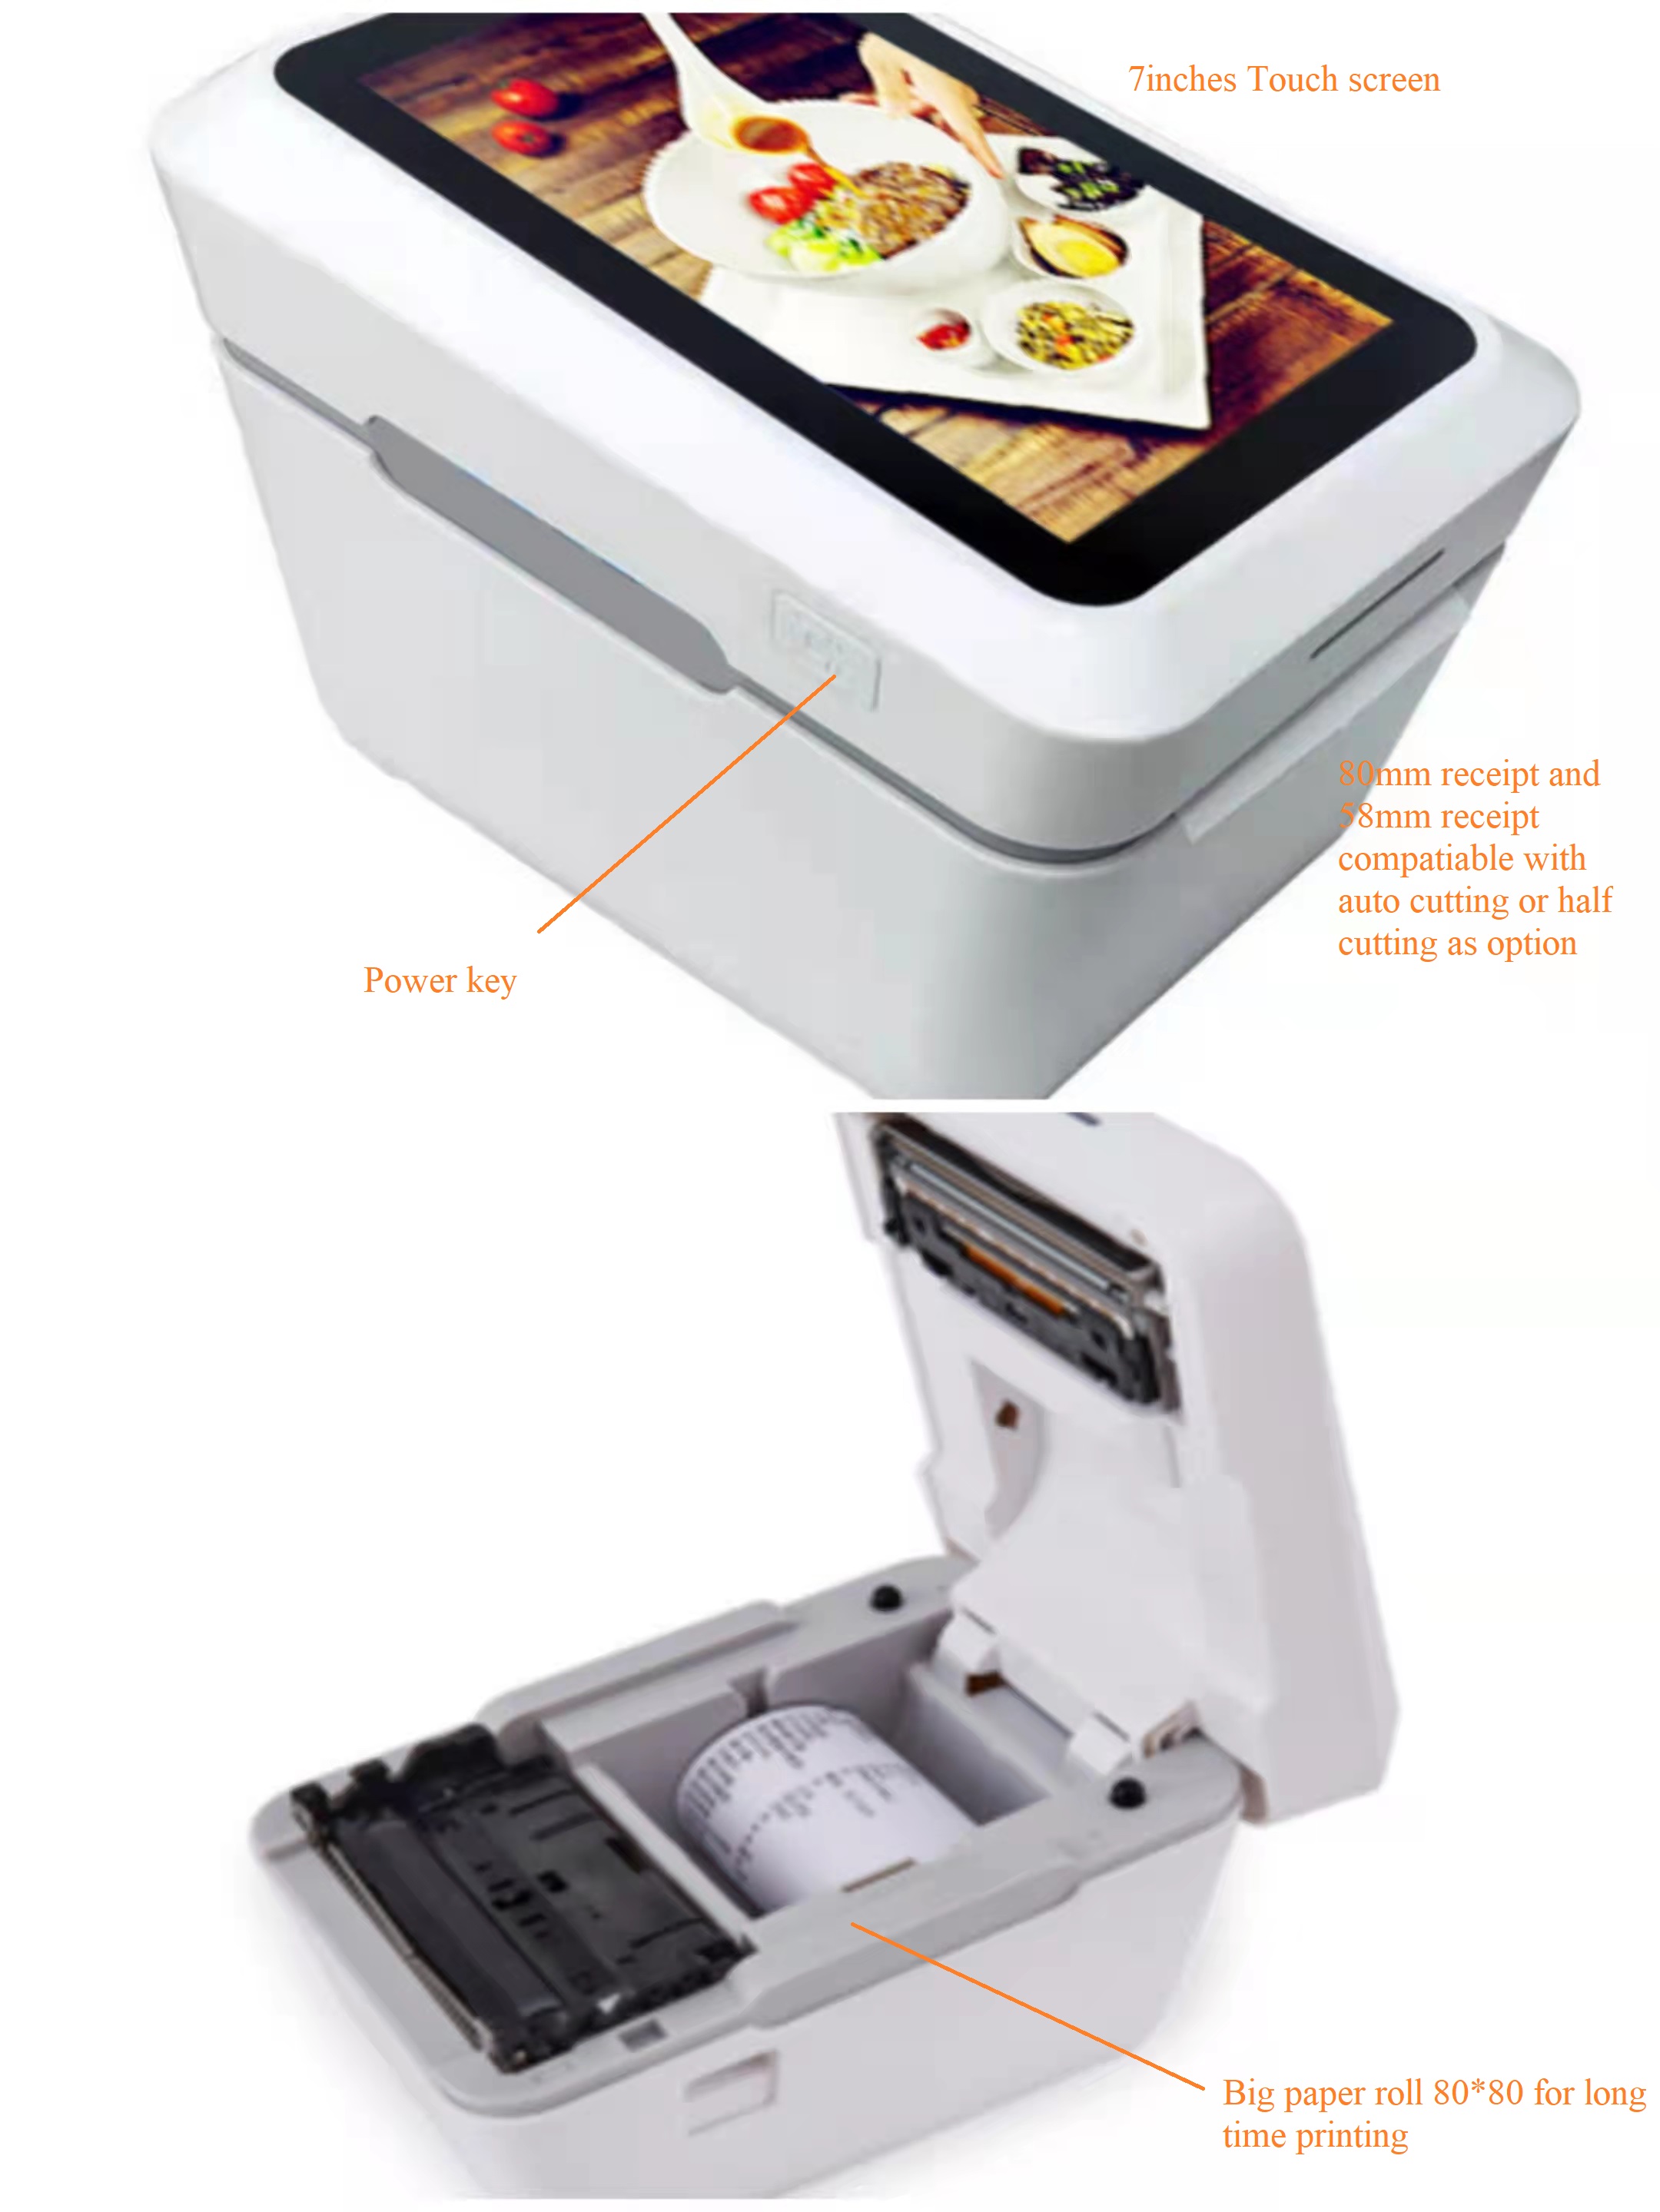 Tablet with printer